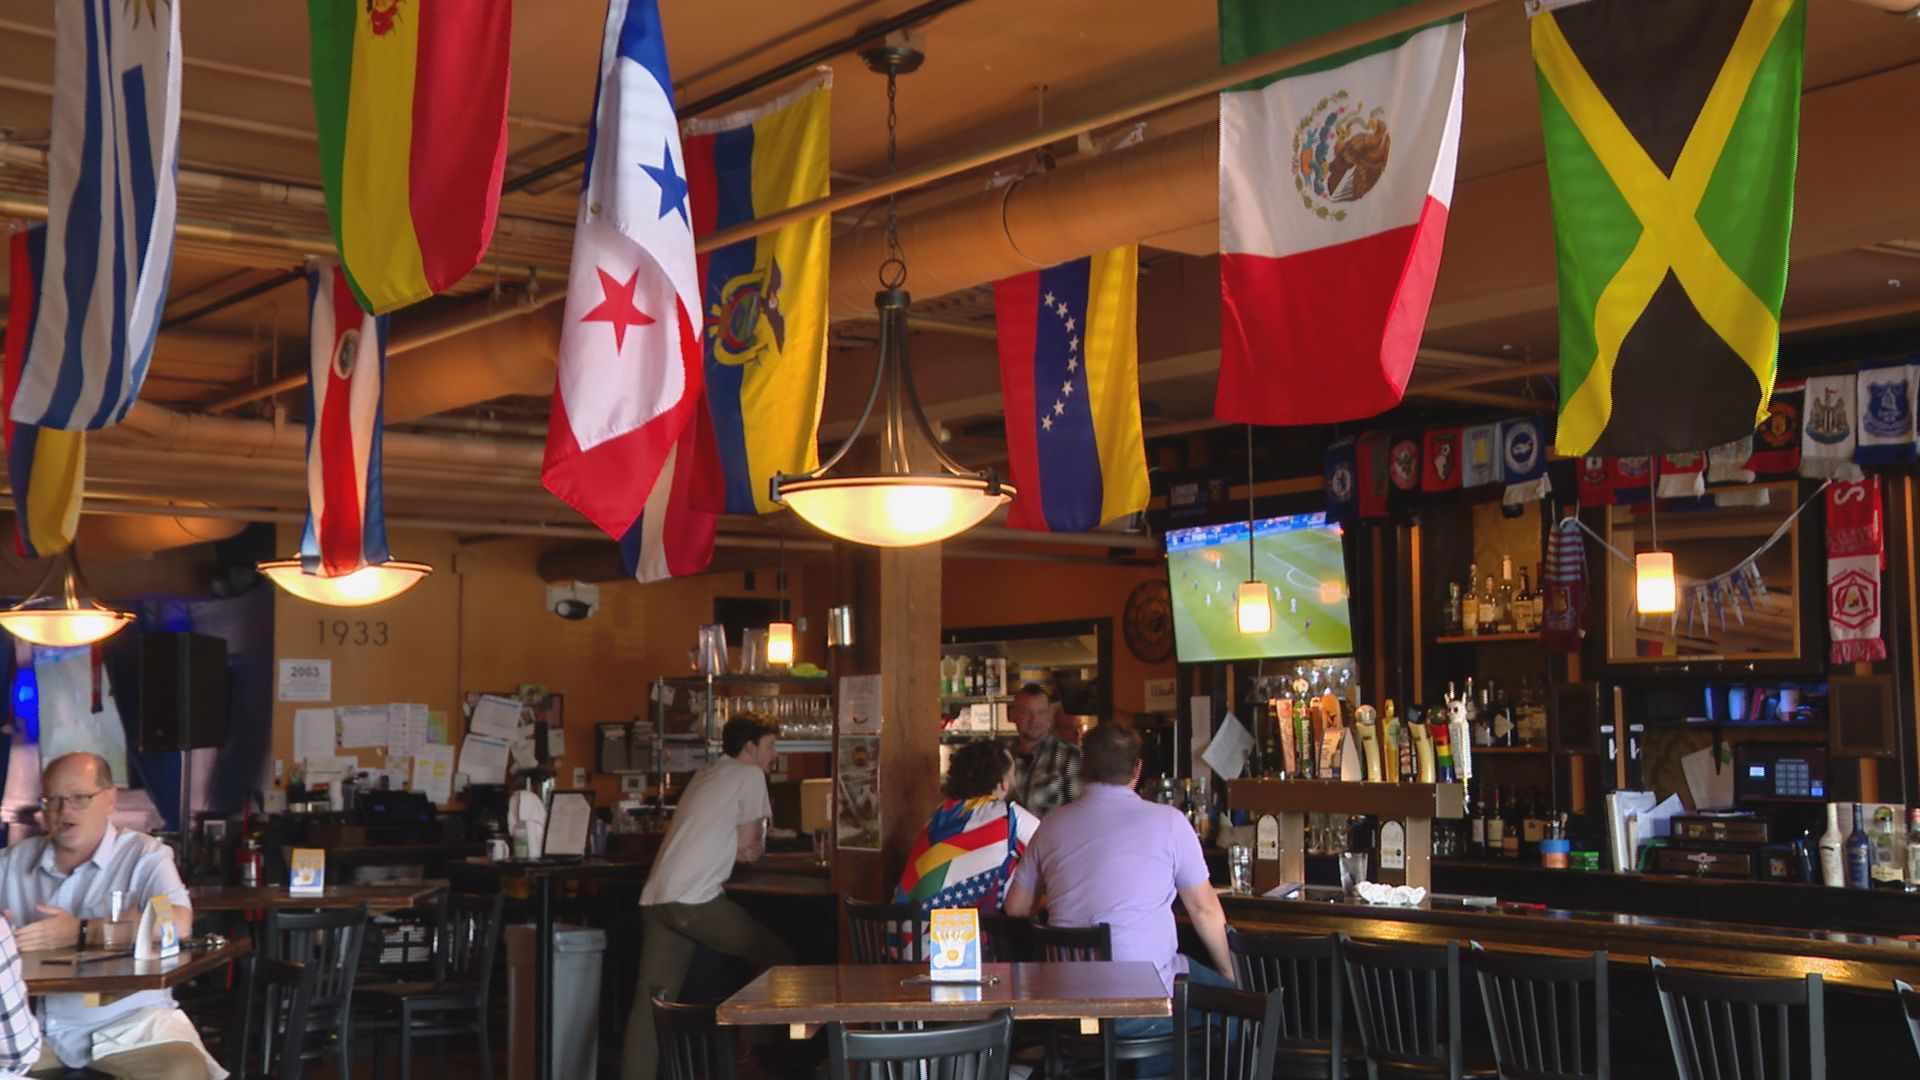 SpeakEZ lounge in downtown Grand Rapids will be open from dusk 'till dawn showing every soccer match this summer.